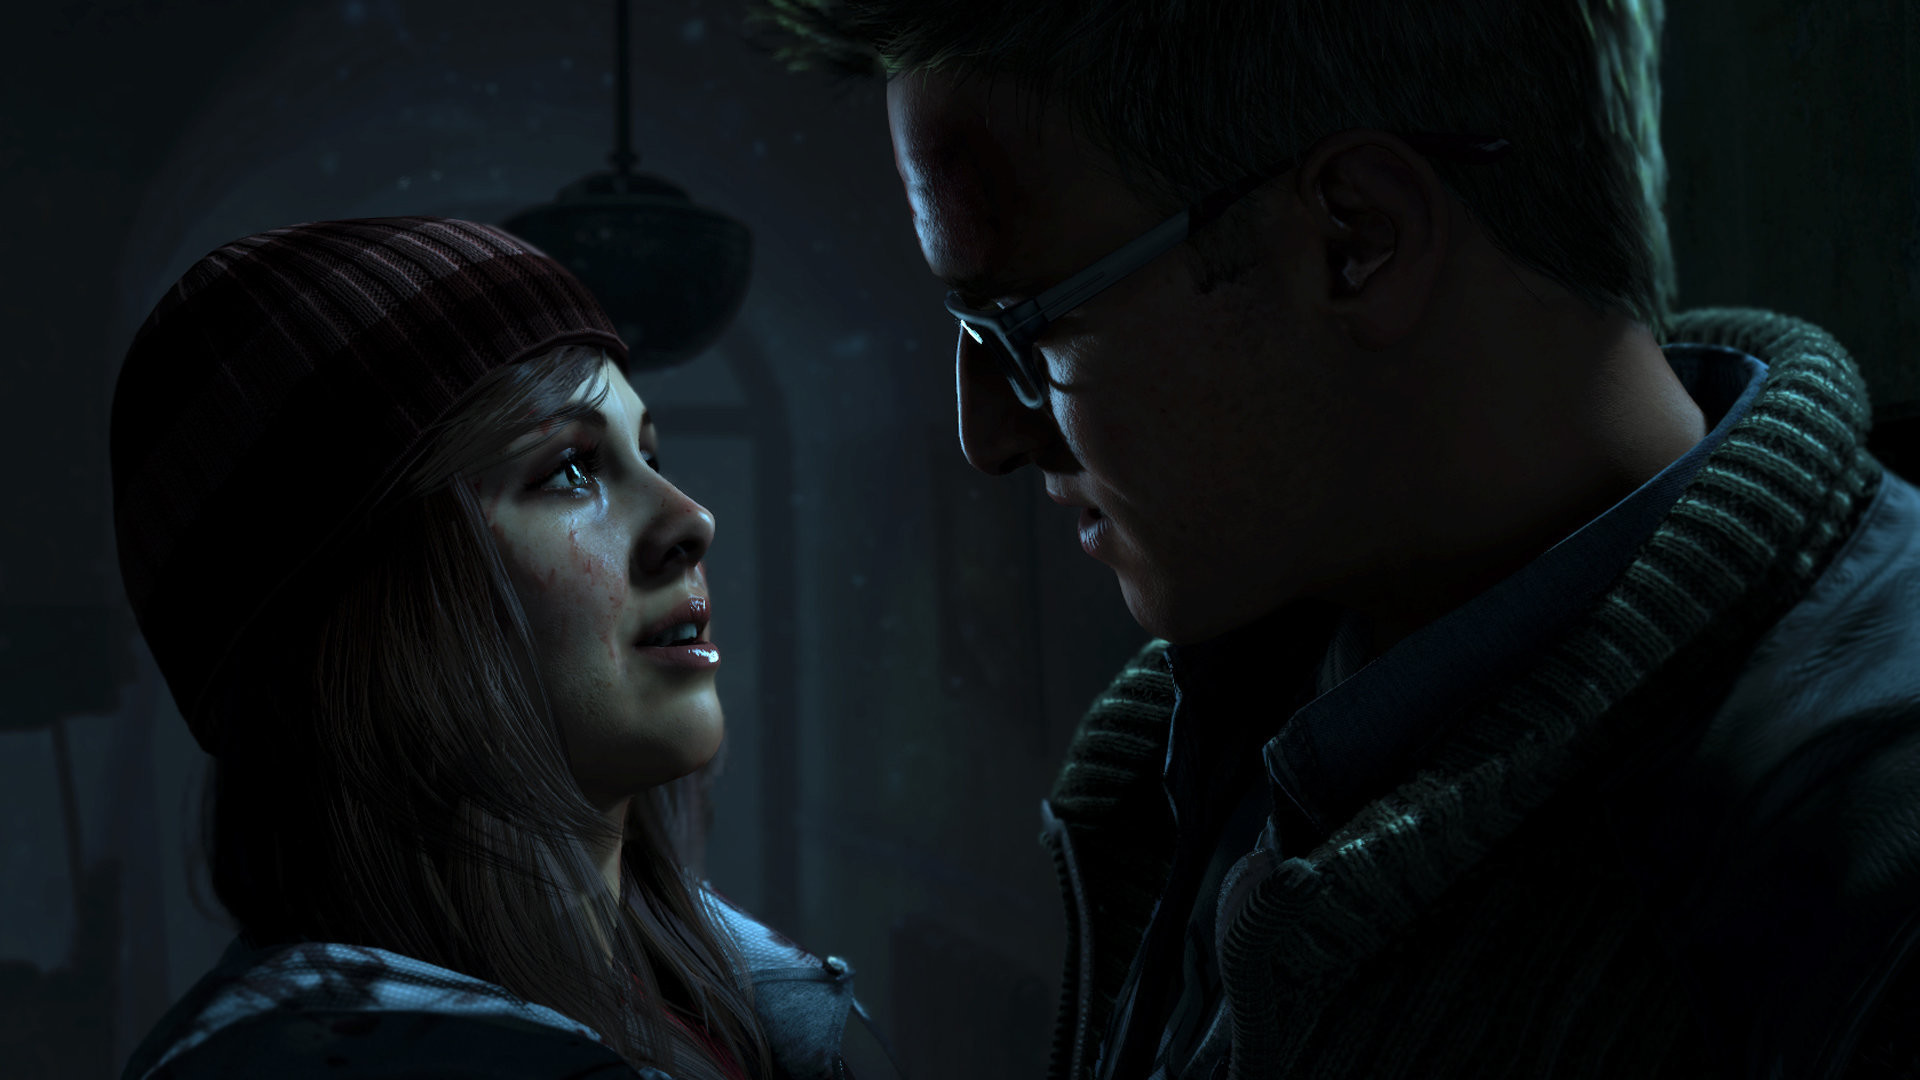 12 HD Until Dawn Game Wallpapers